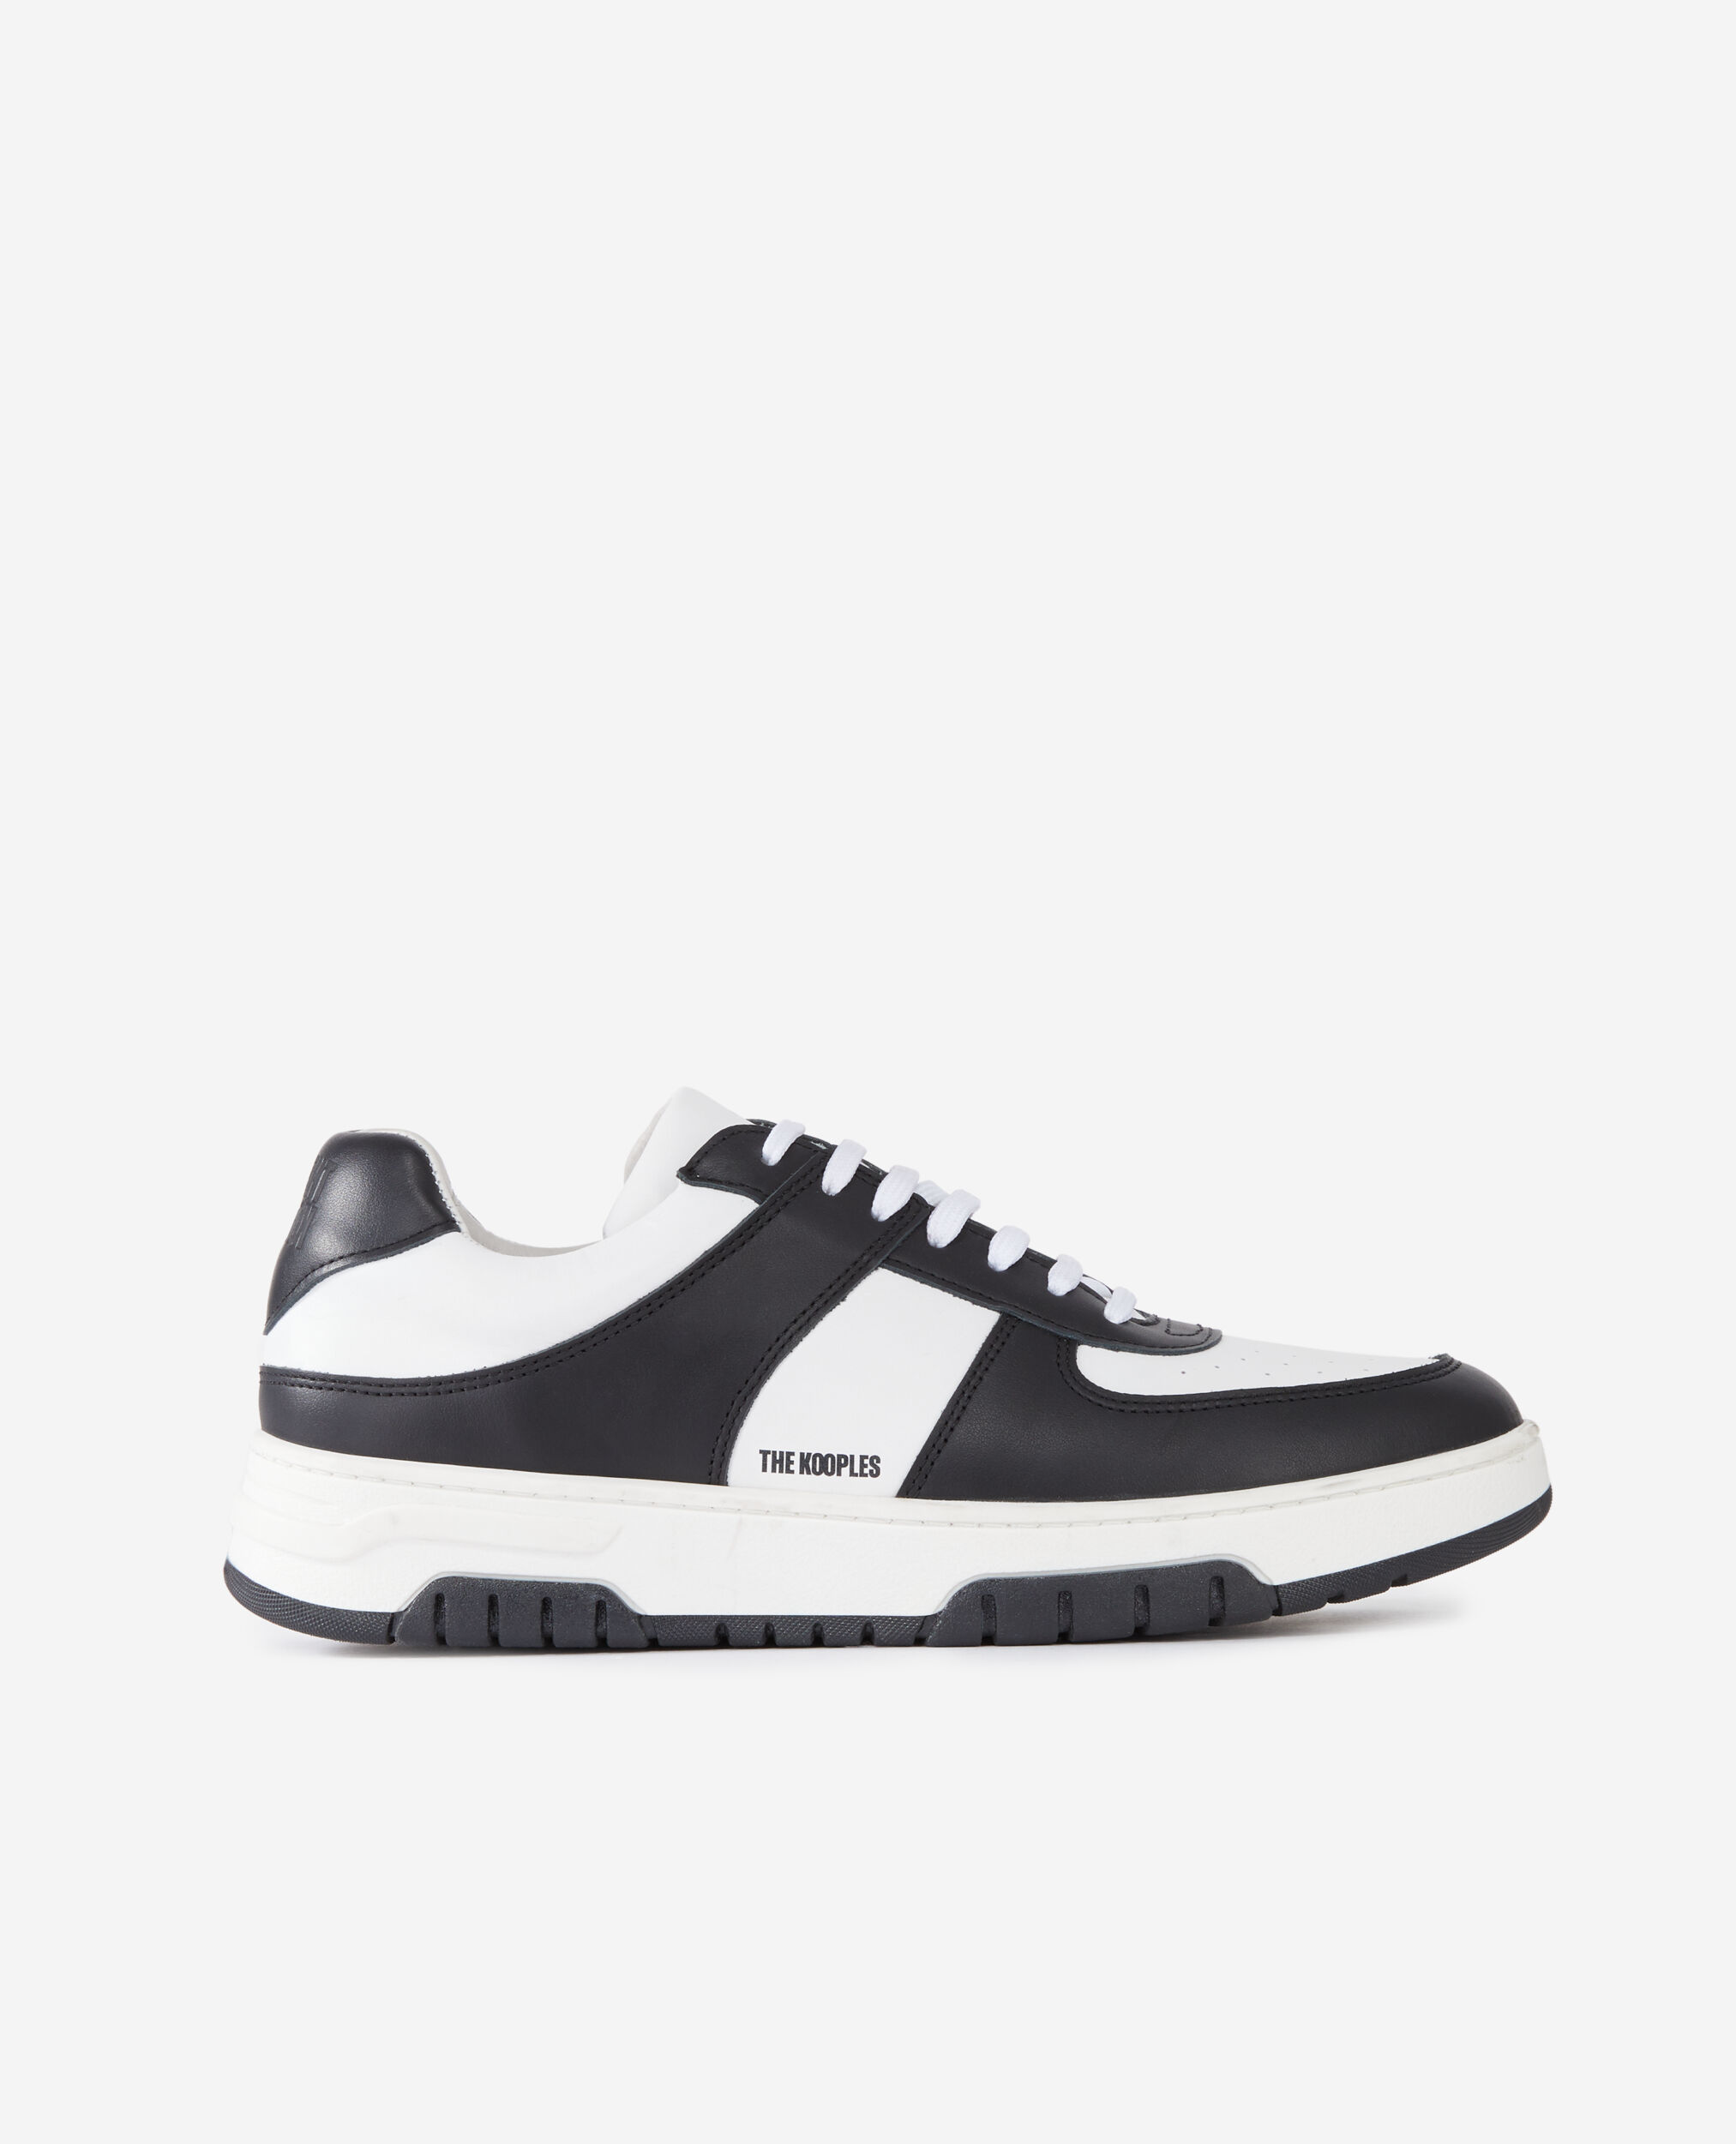 Black and white sneakers, BLACK, hi-res image number null